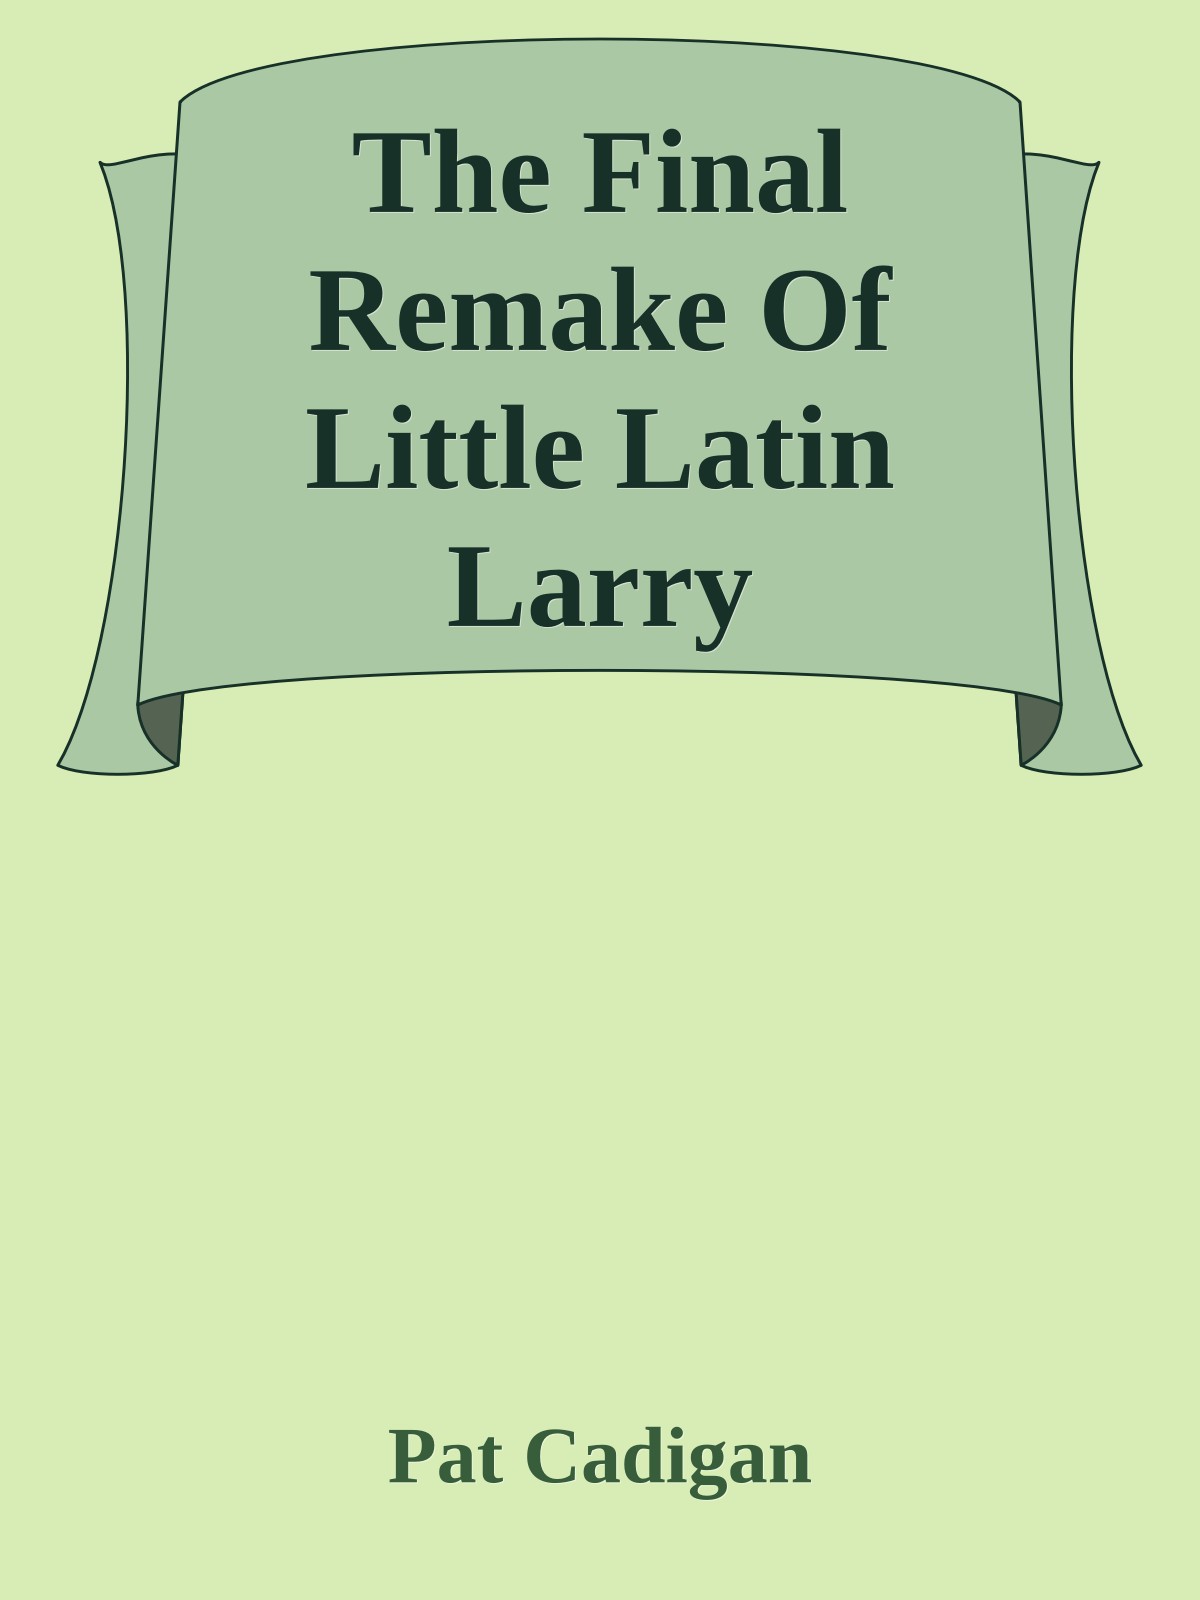 The Final Remake Of Little Latin Larry